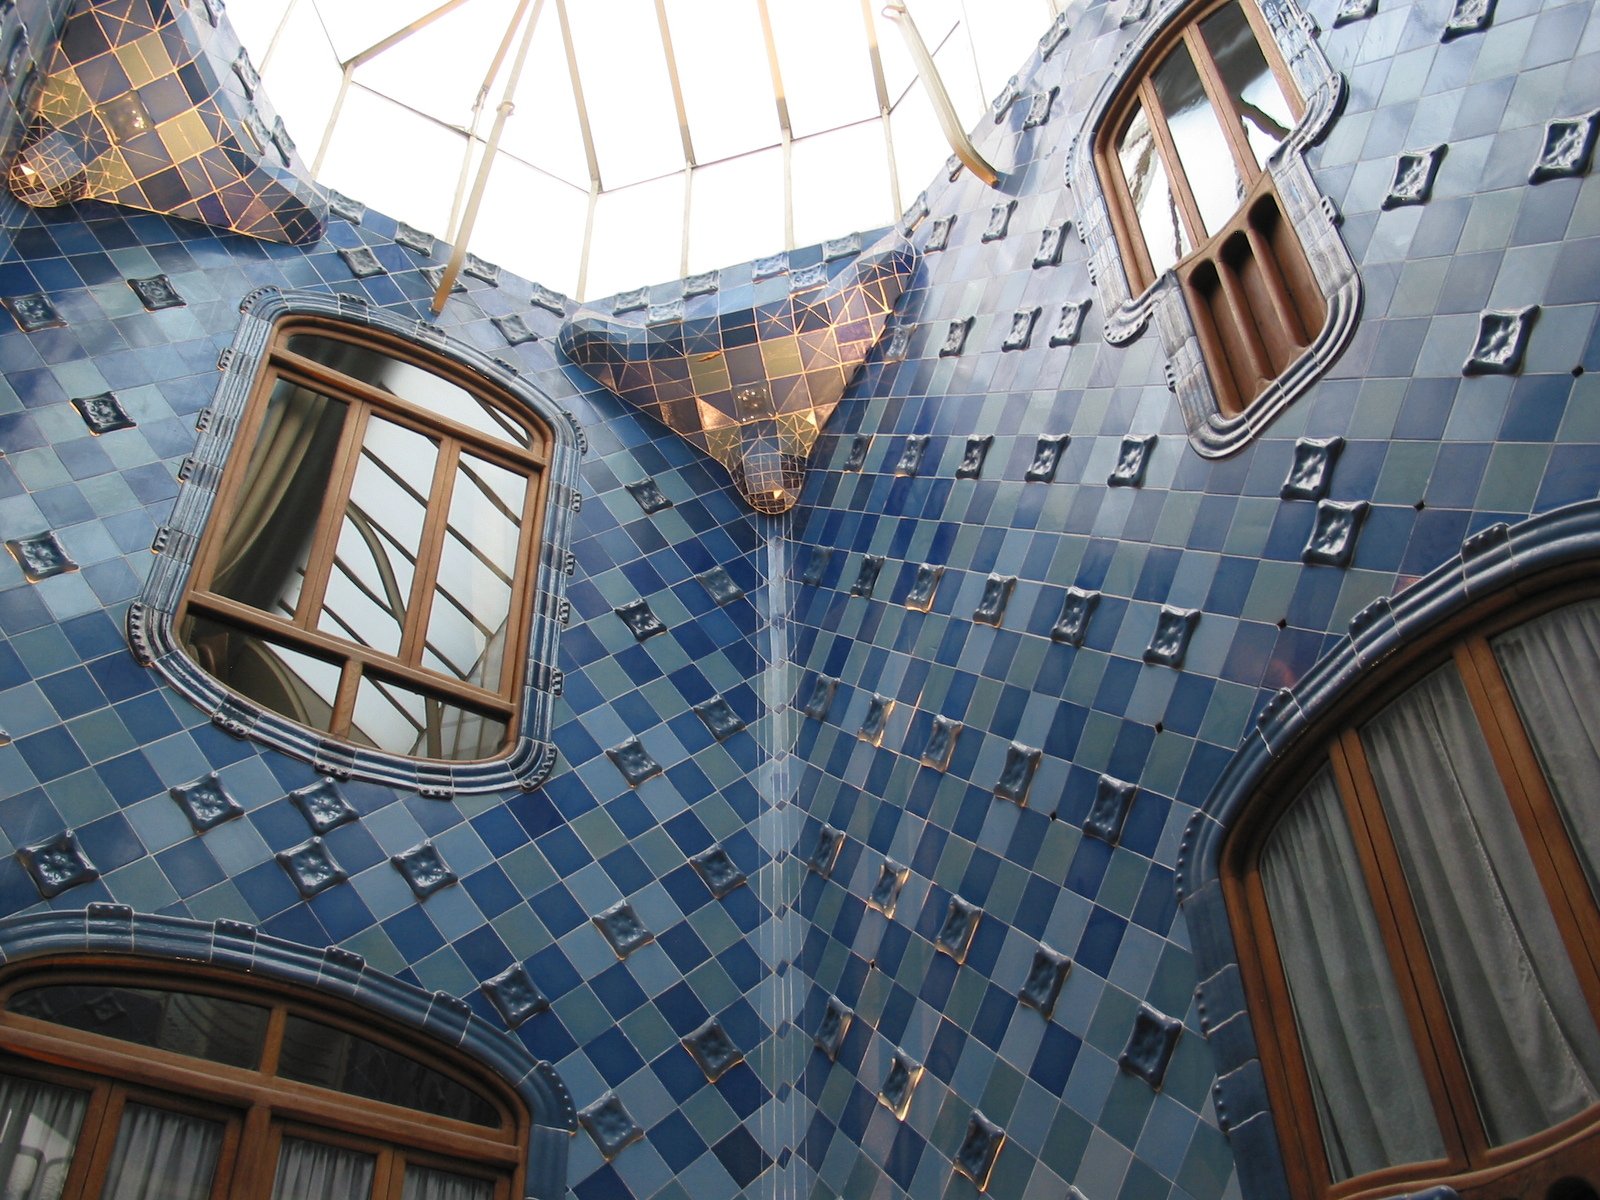 the building is covered in beautiful blue tile